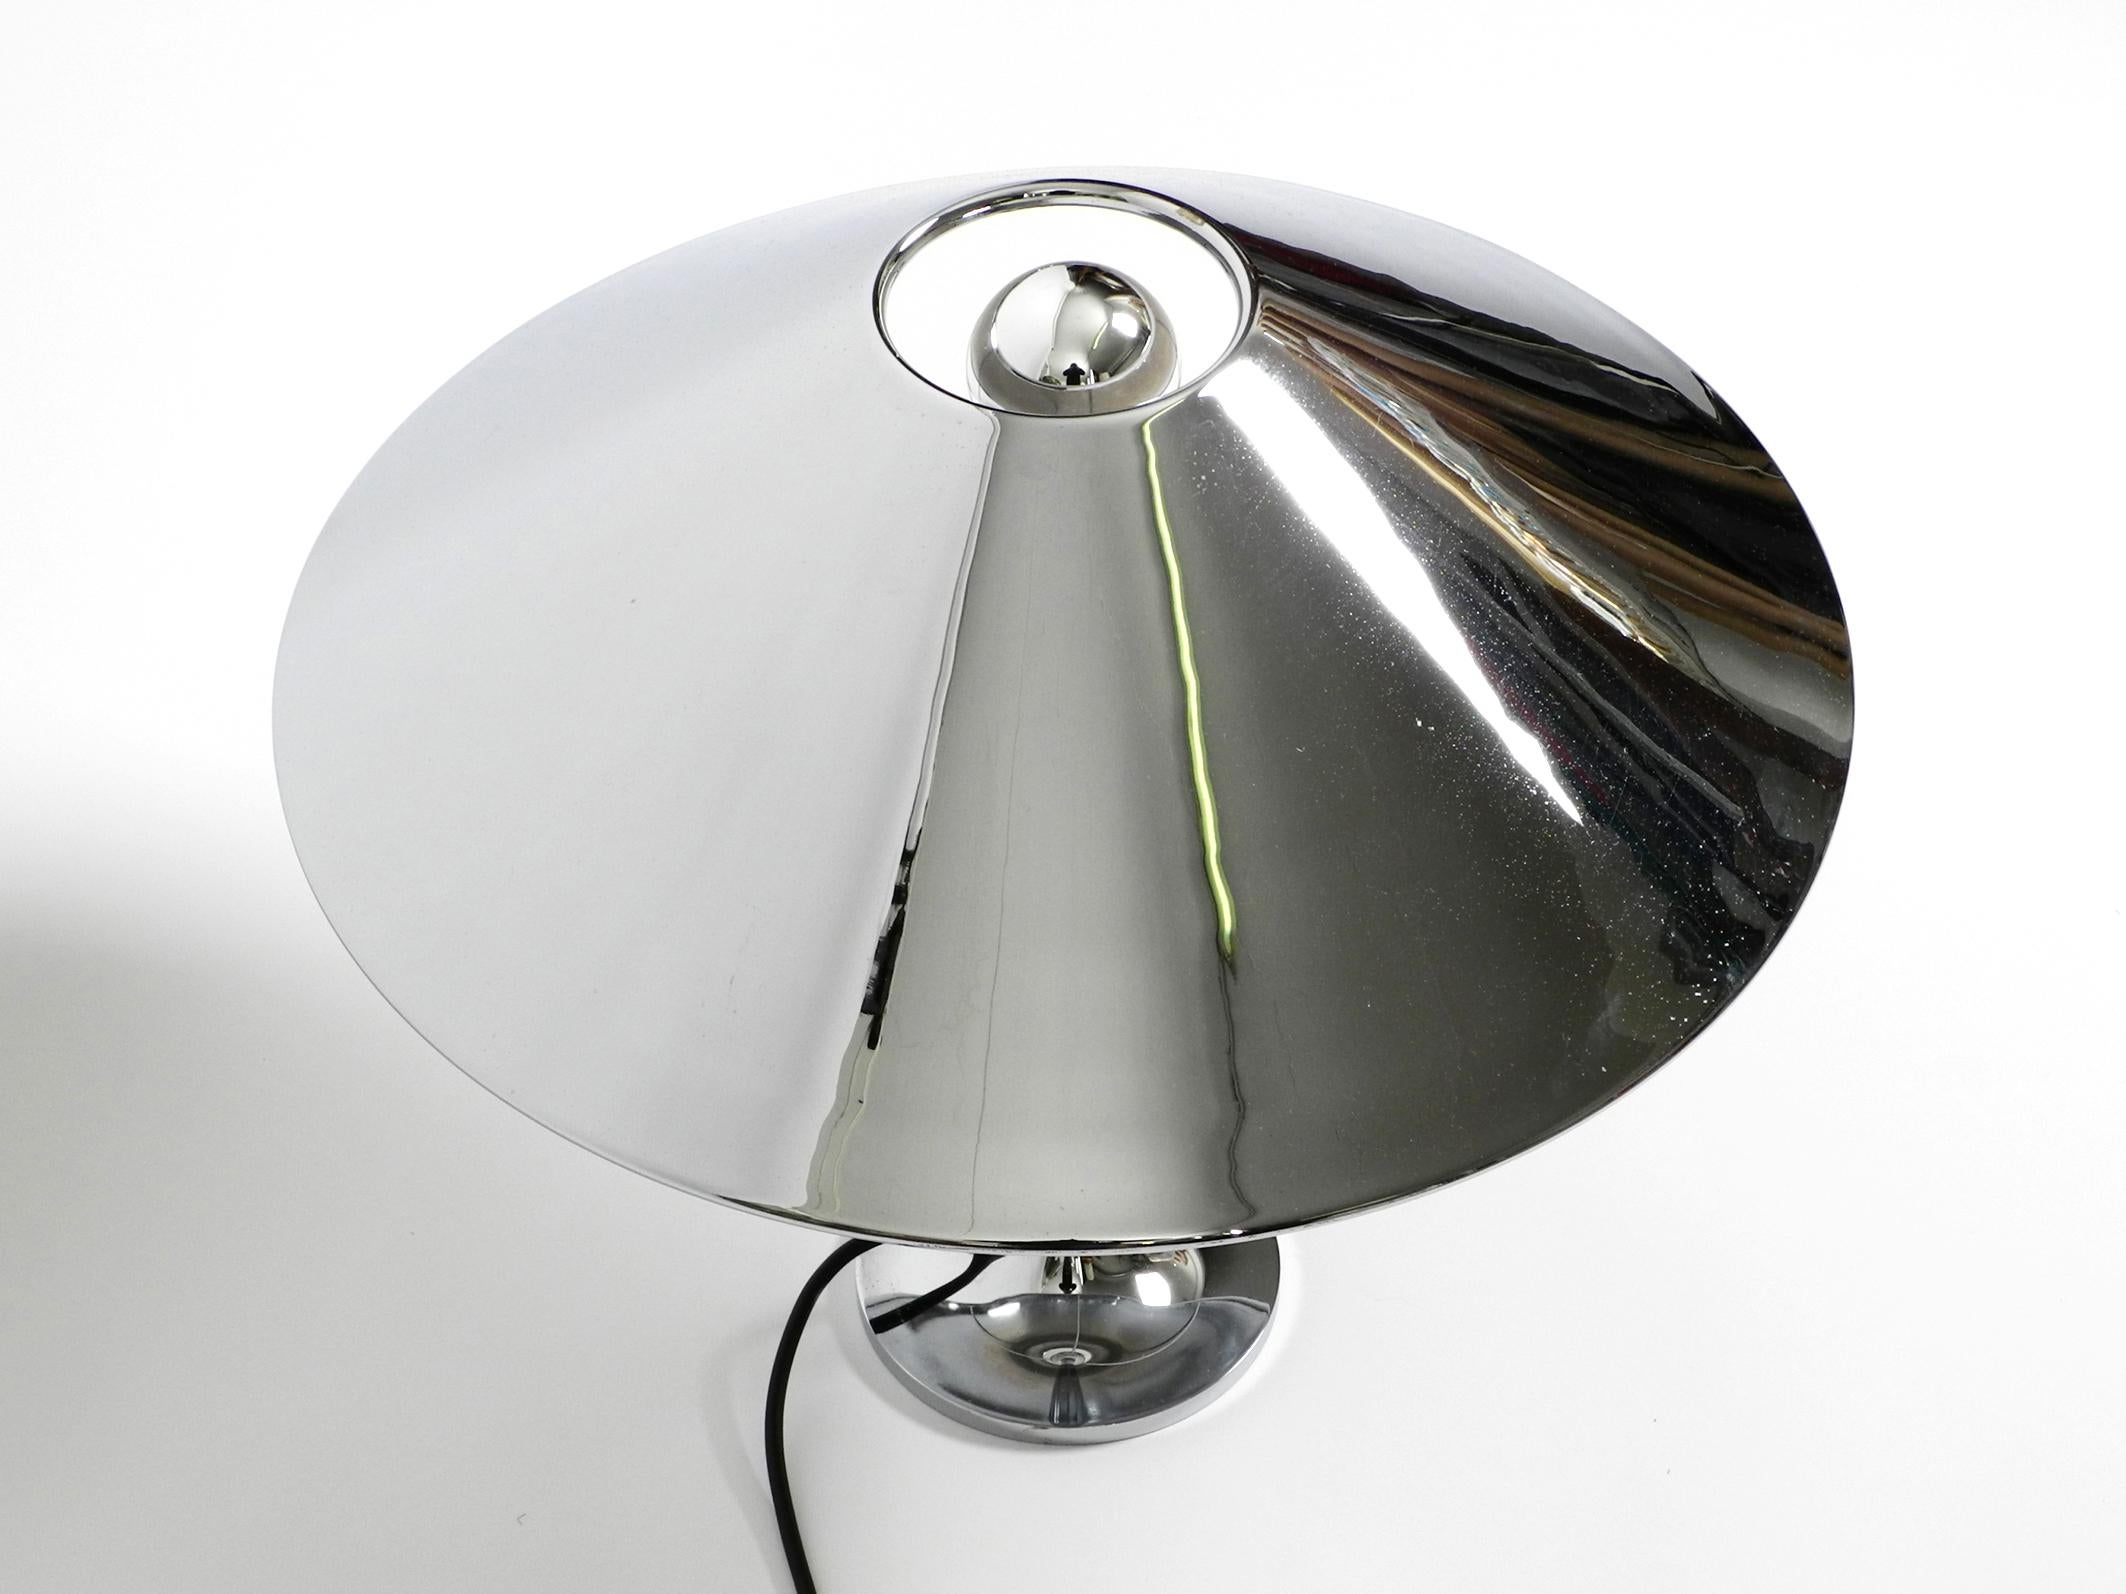 Large, Heavy 70s Metal Chrome Table Lamp with a Metal Shade in a Classic Design 9